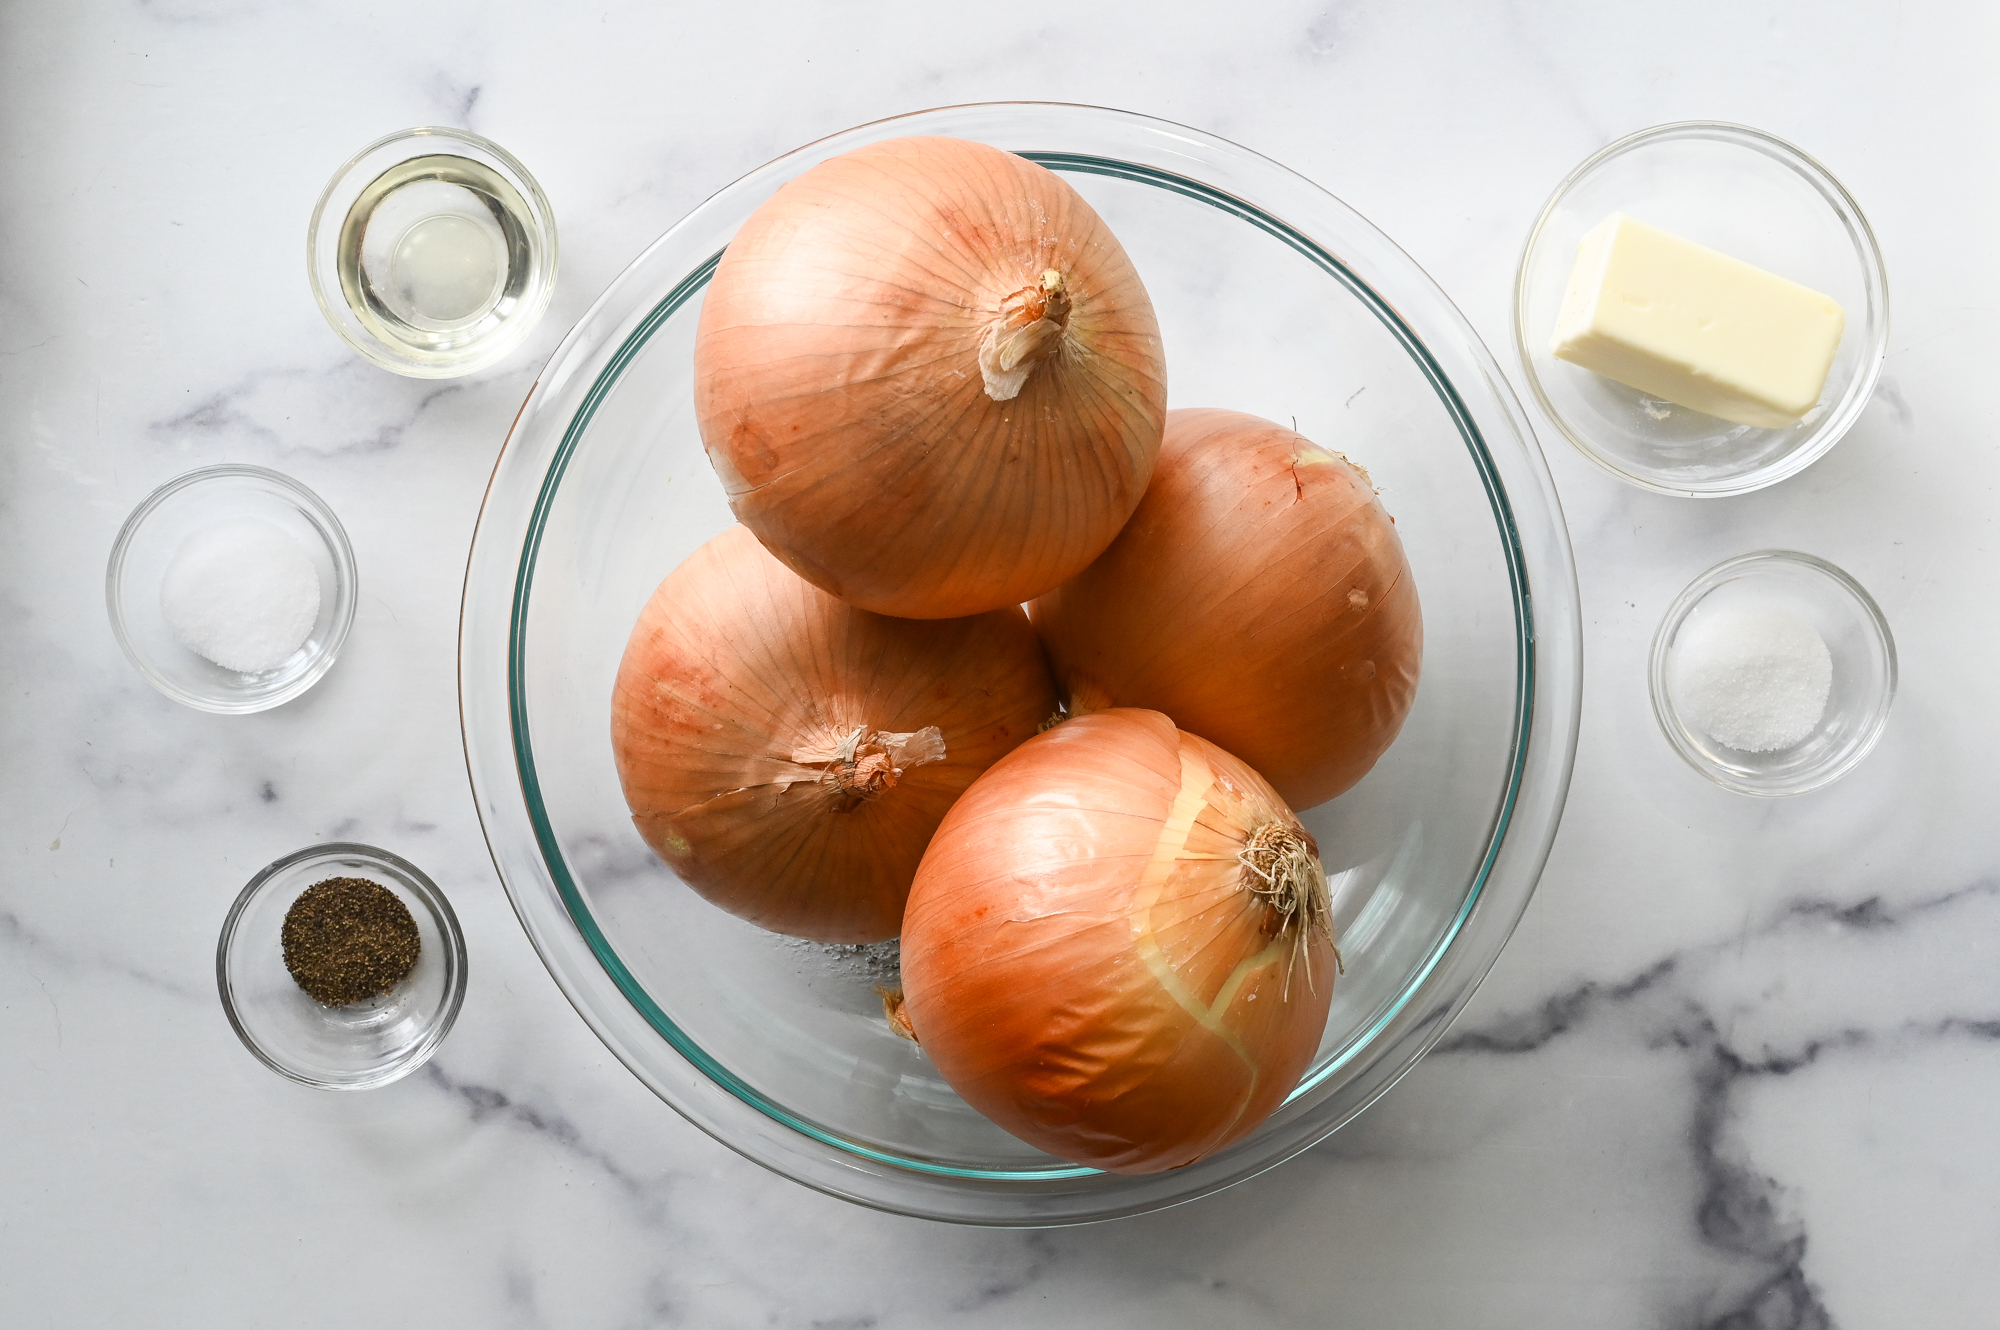 ingredients to make caramelized onions